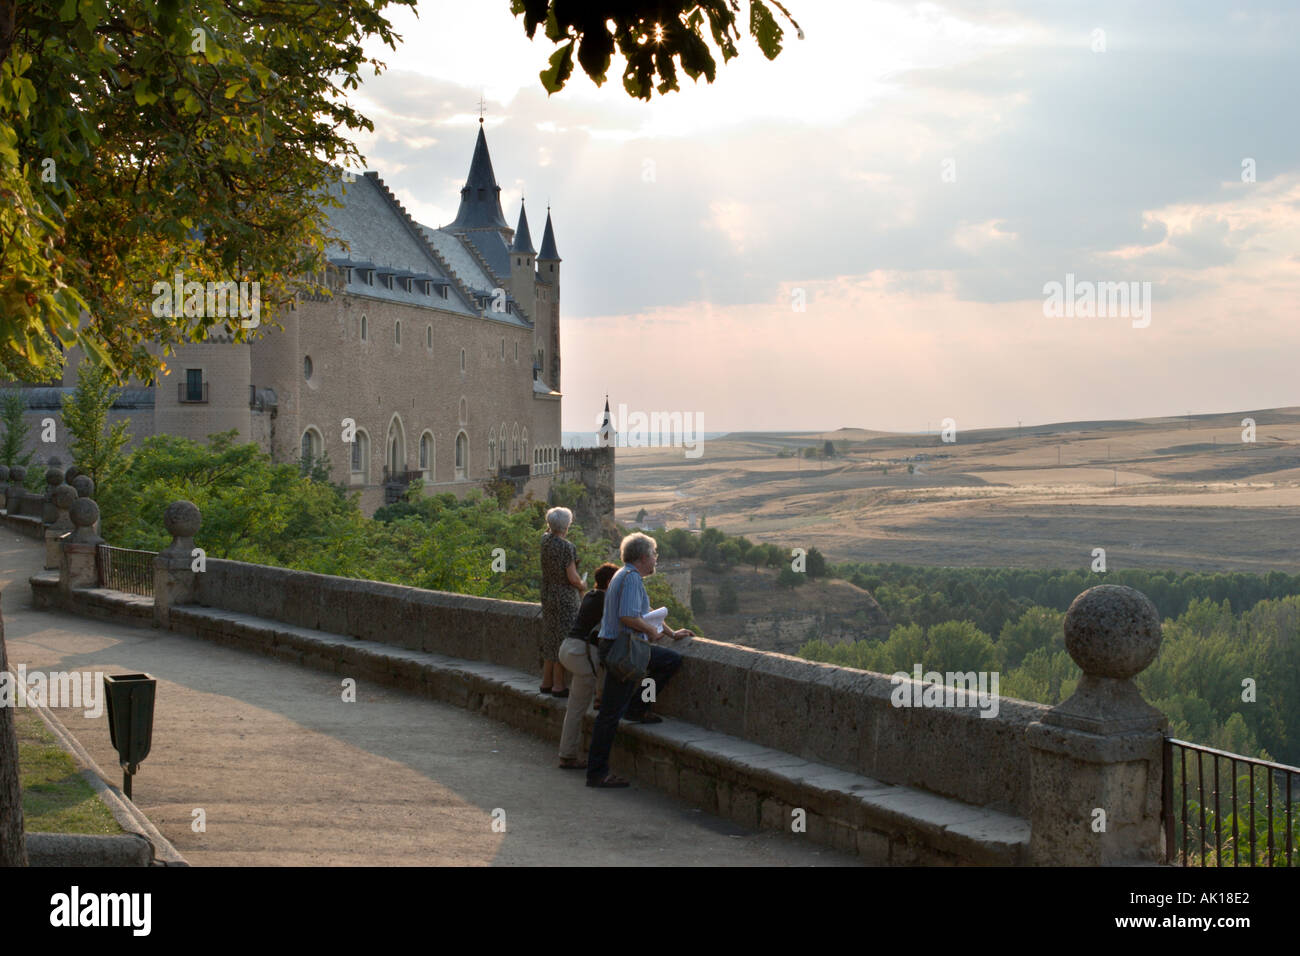 People looking out over the countryside by the Alcazar in the early evening, Segovia, Castilla y Leon, Spain Stock Photo